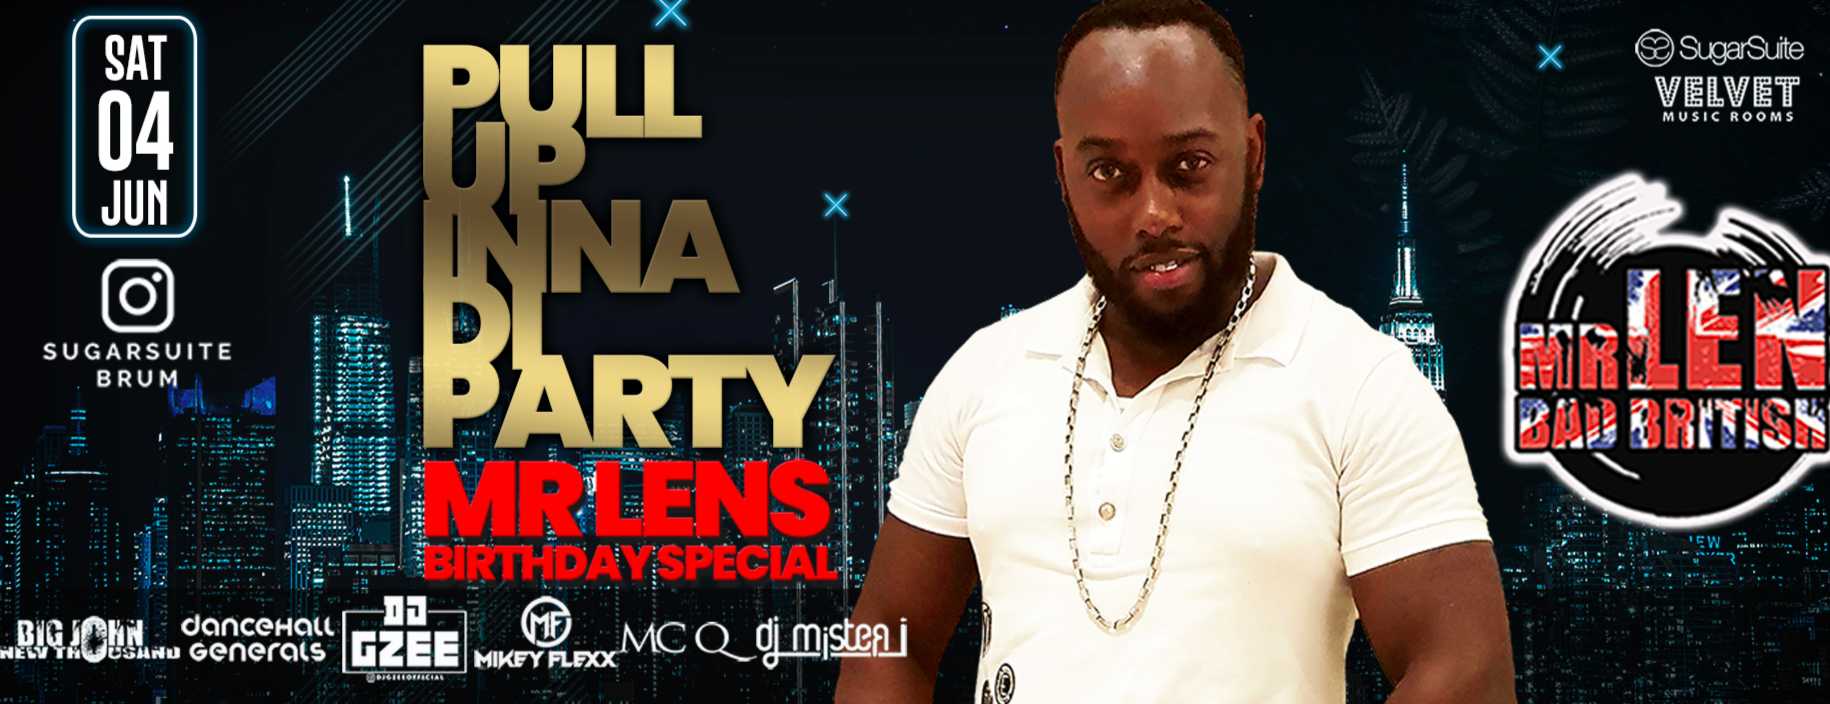 Mr Lens Birthday Special Pull Up Inna Di Party at SugarSuite